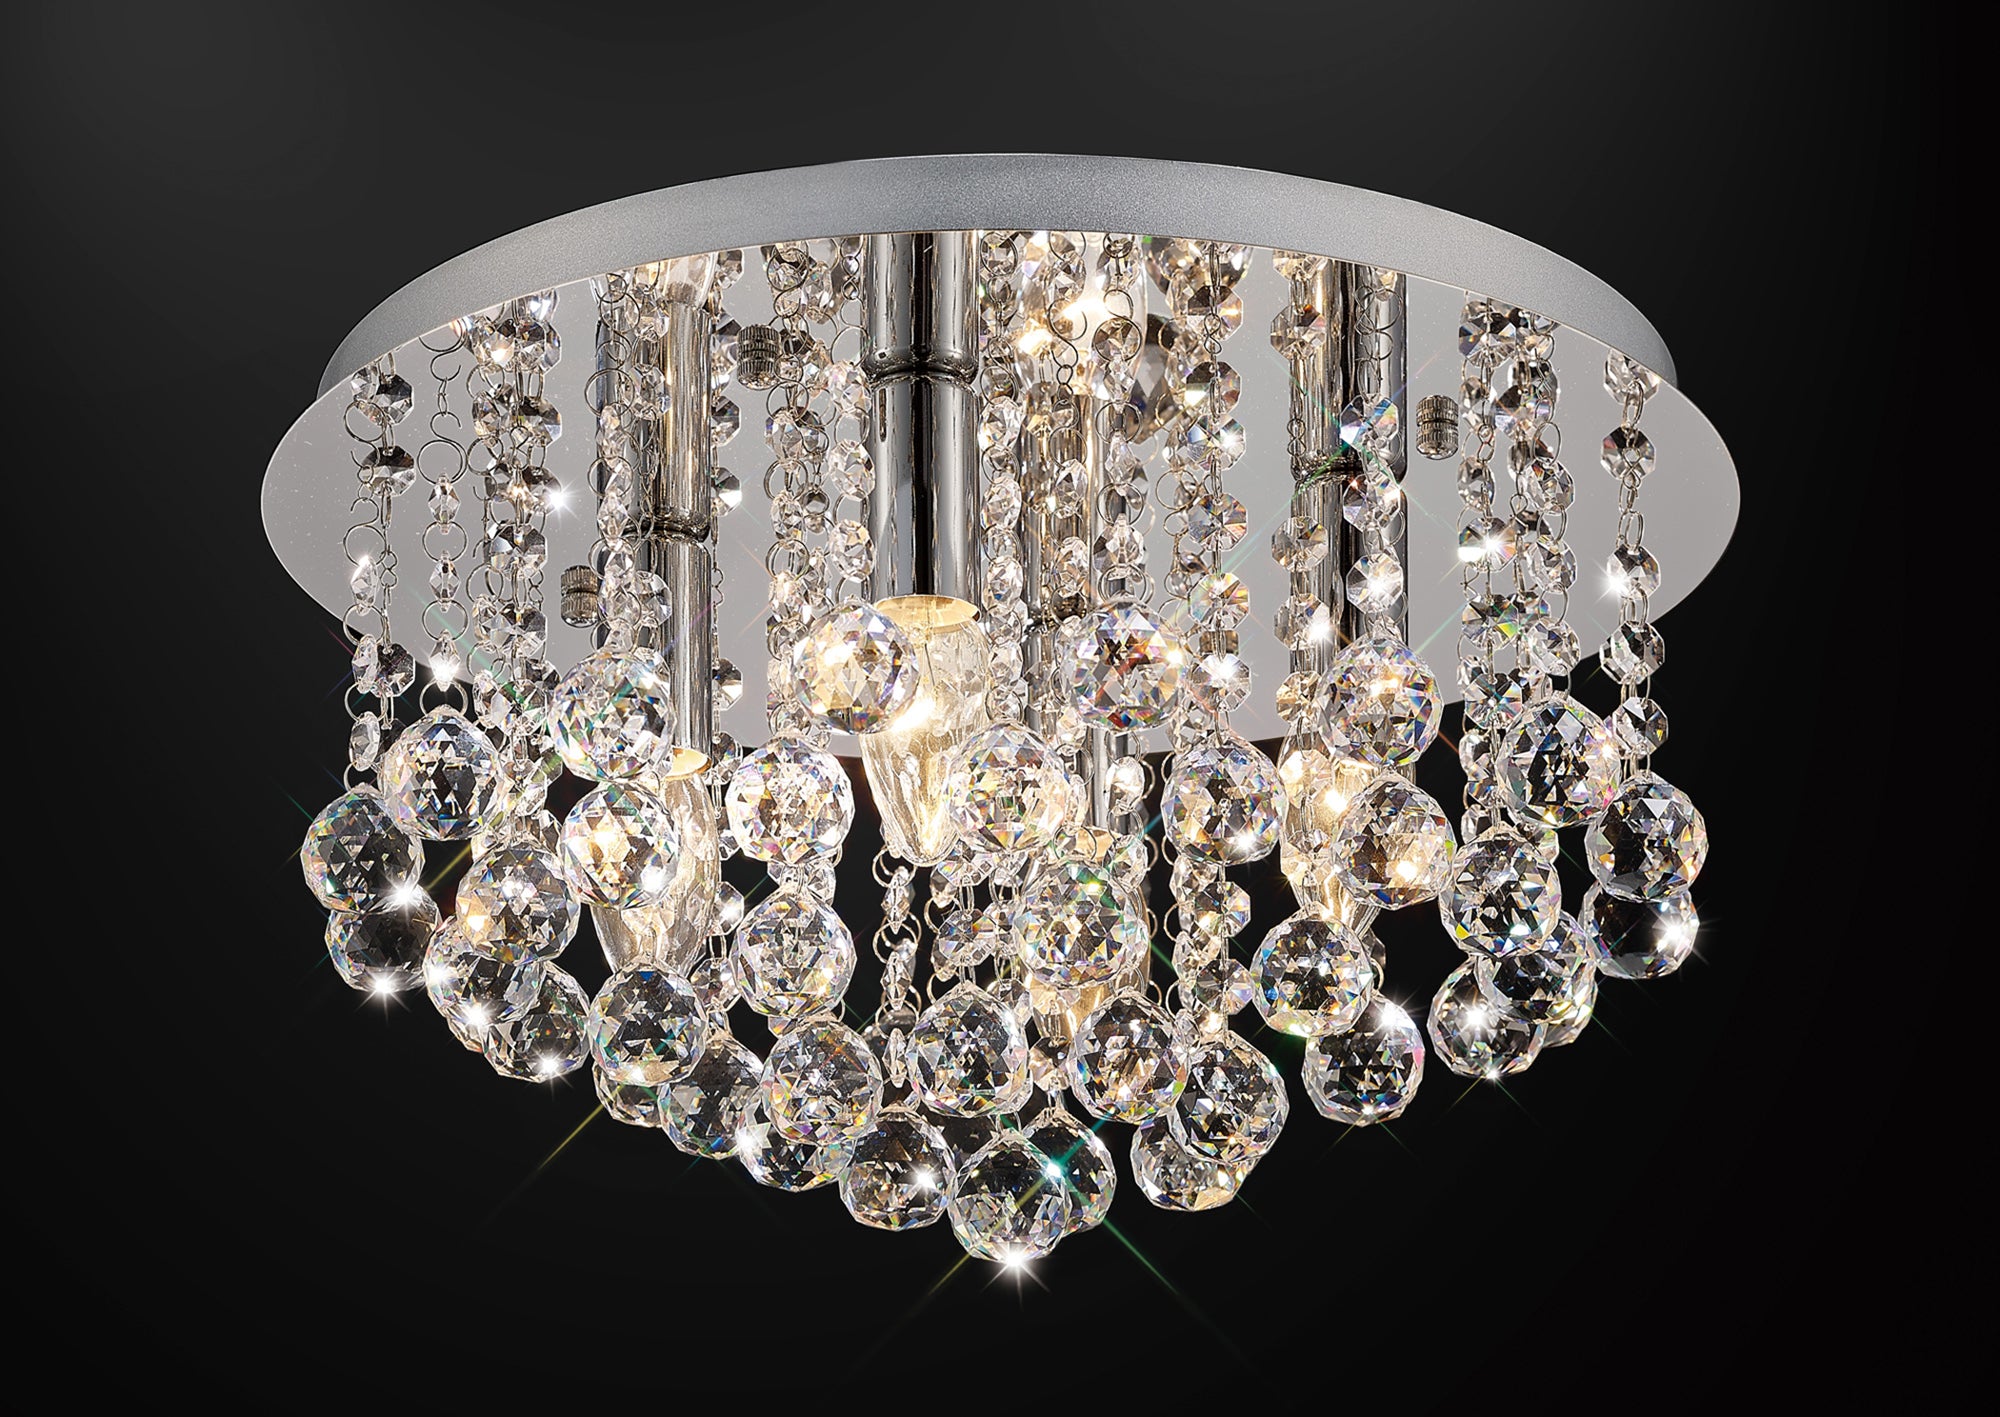 Acton Flush Ceiling 4 Light E14, 380mm Round, Polished Chrome/Sphere Crystal CLEARANCE